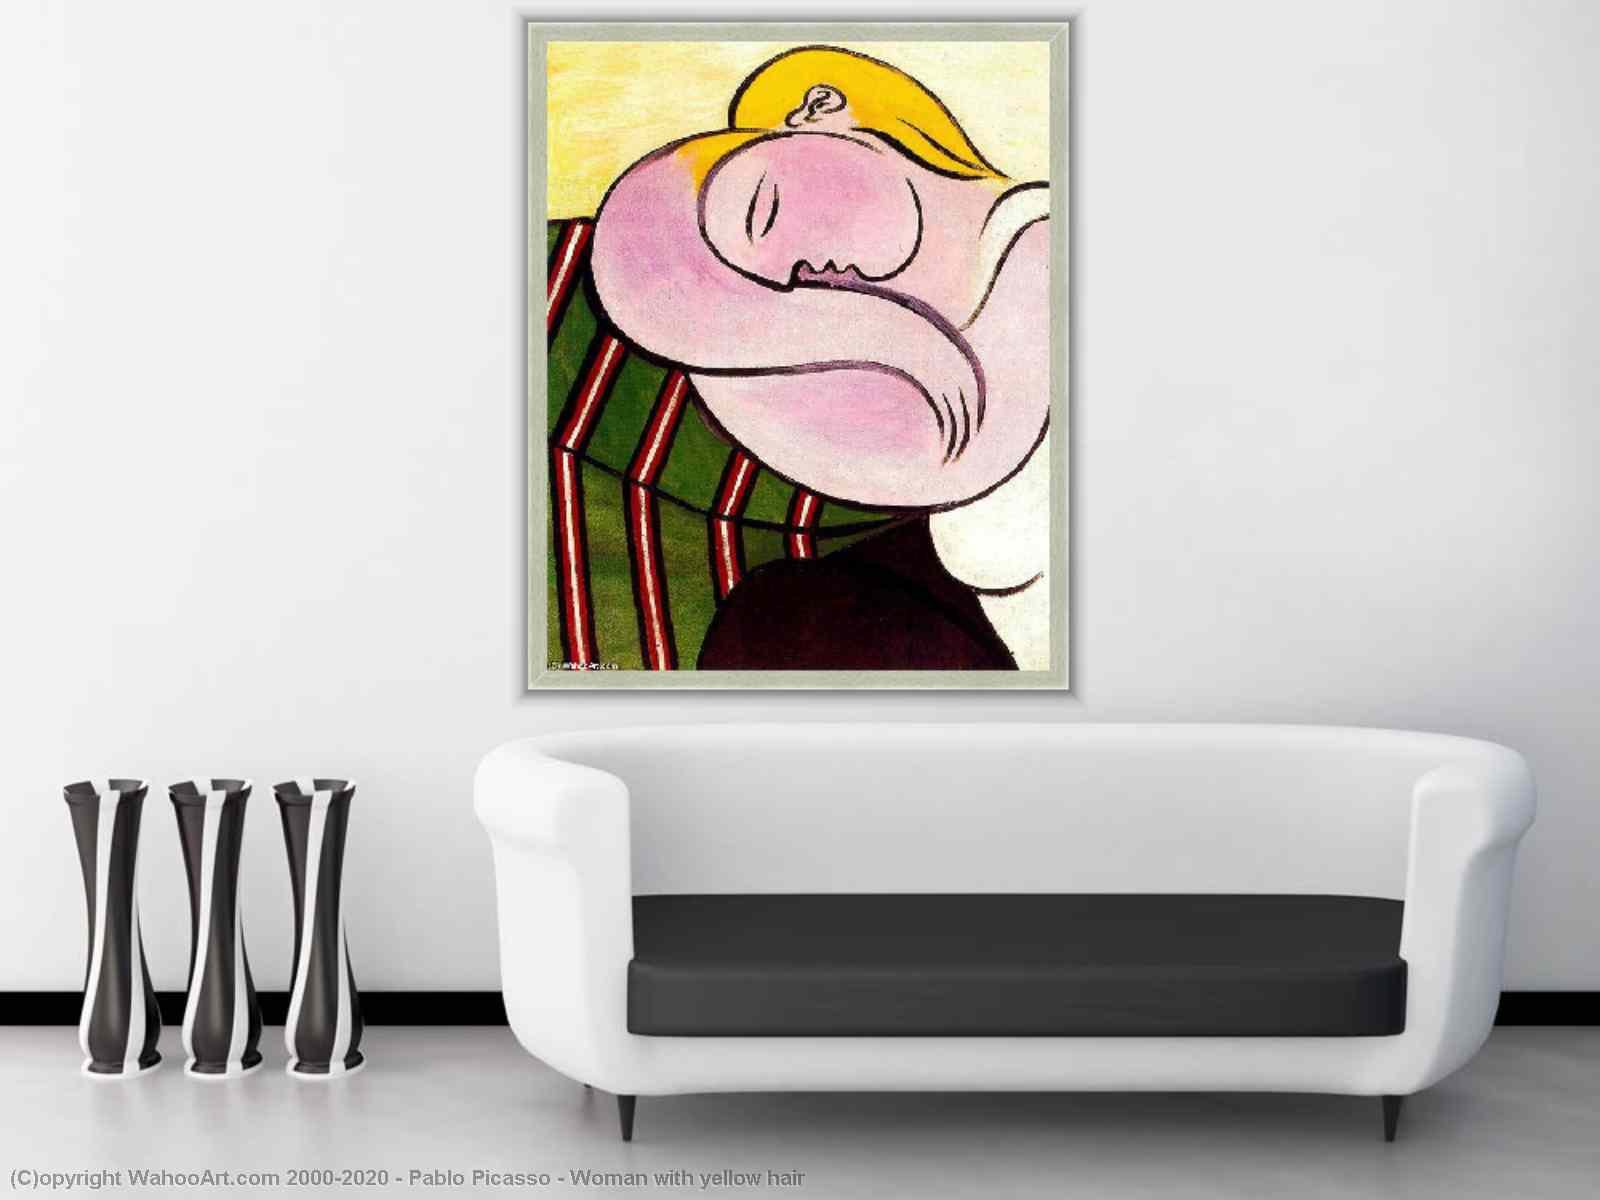 Woman with yellow hair by Pablo Picasso | Artwork Replica Pop Art |  